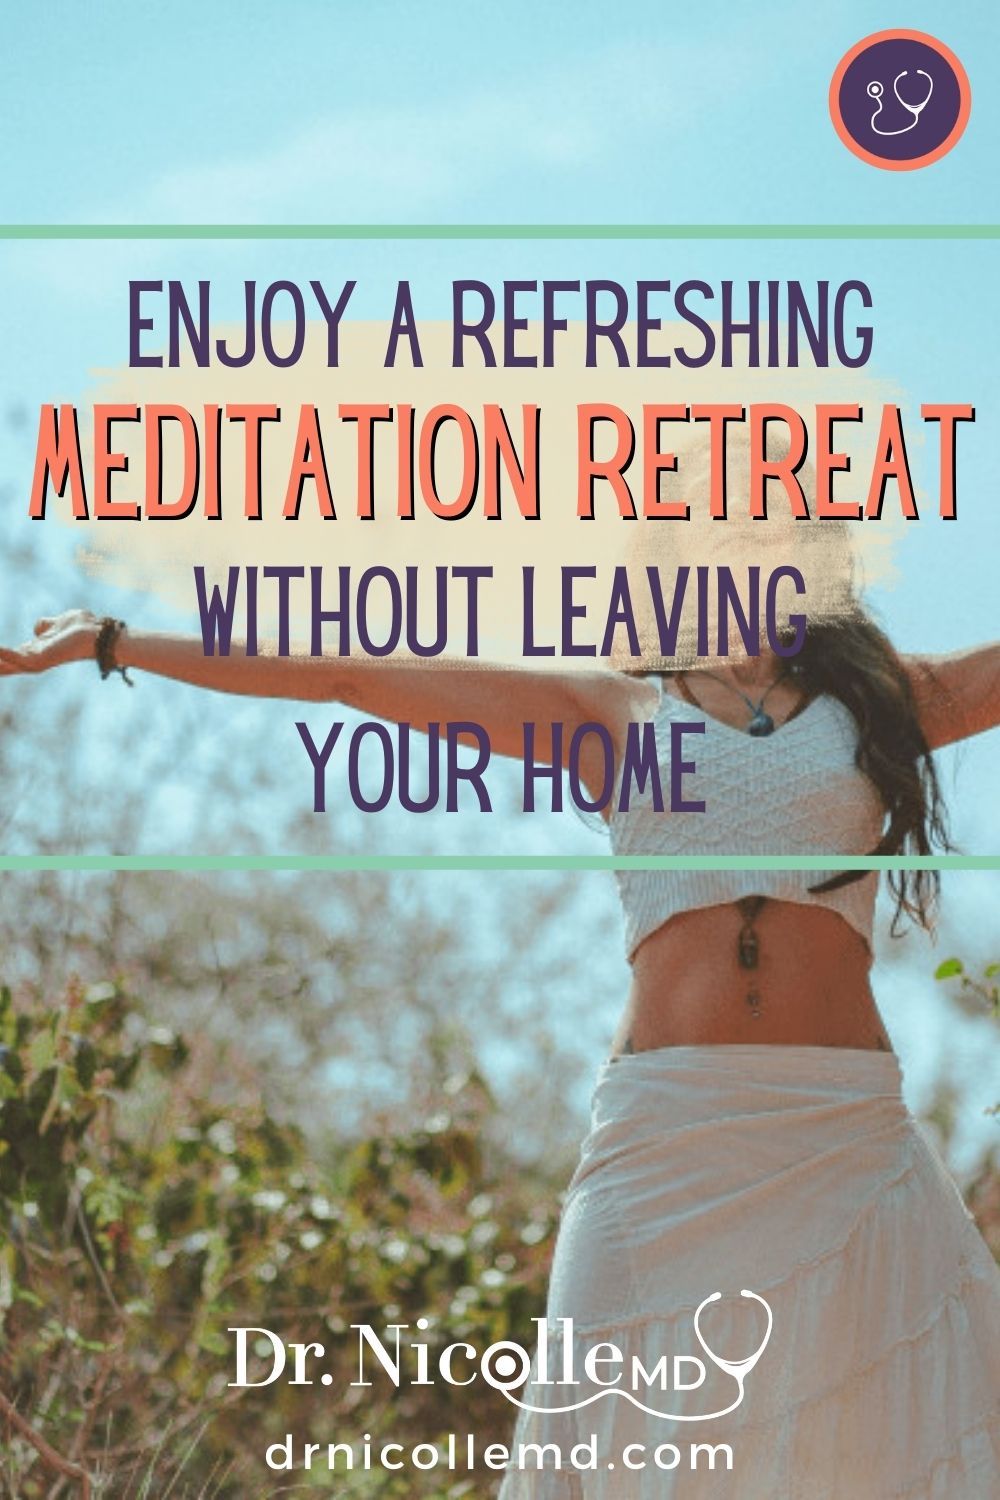 meditation retreat for your home, Enjoy A Refreshing Meditation Retreat Without Leaving Your Home, Dr. Nicolle